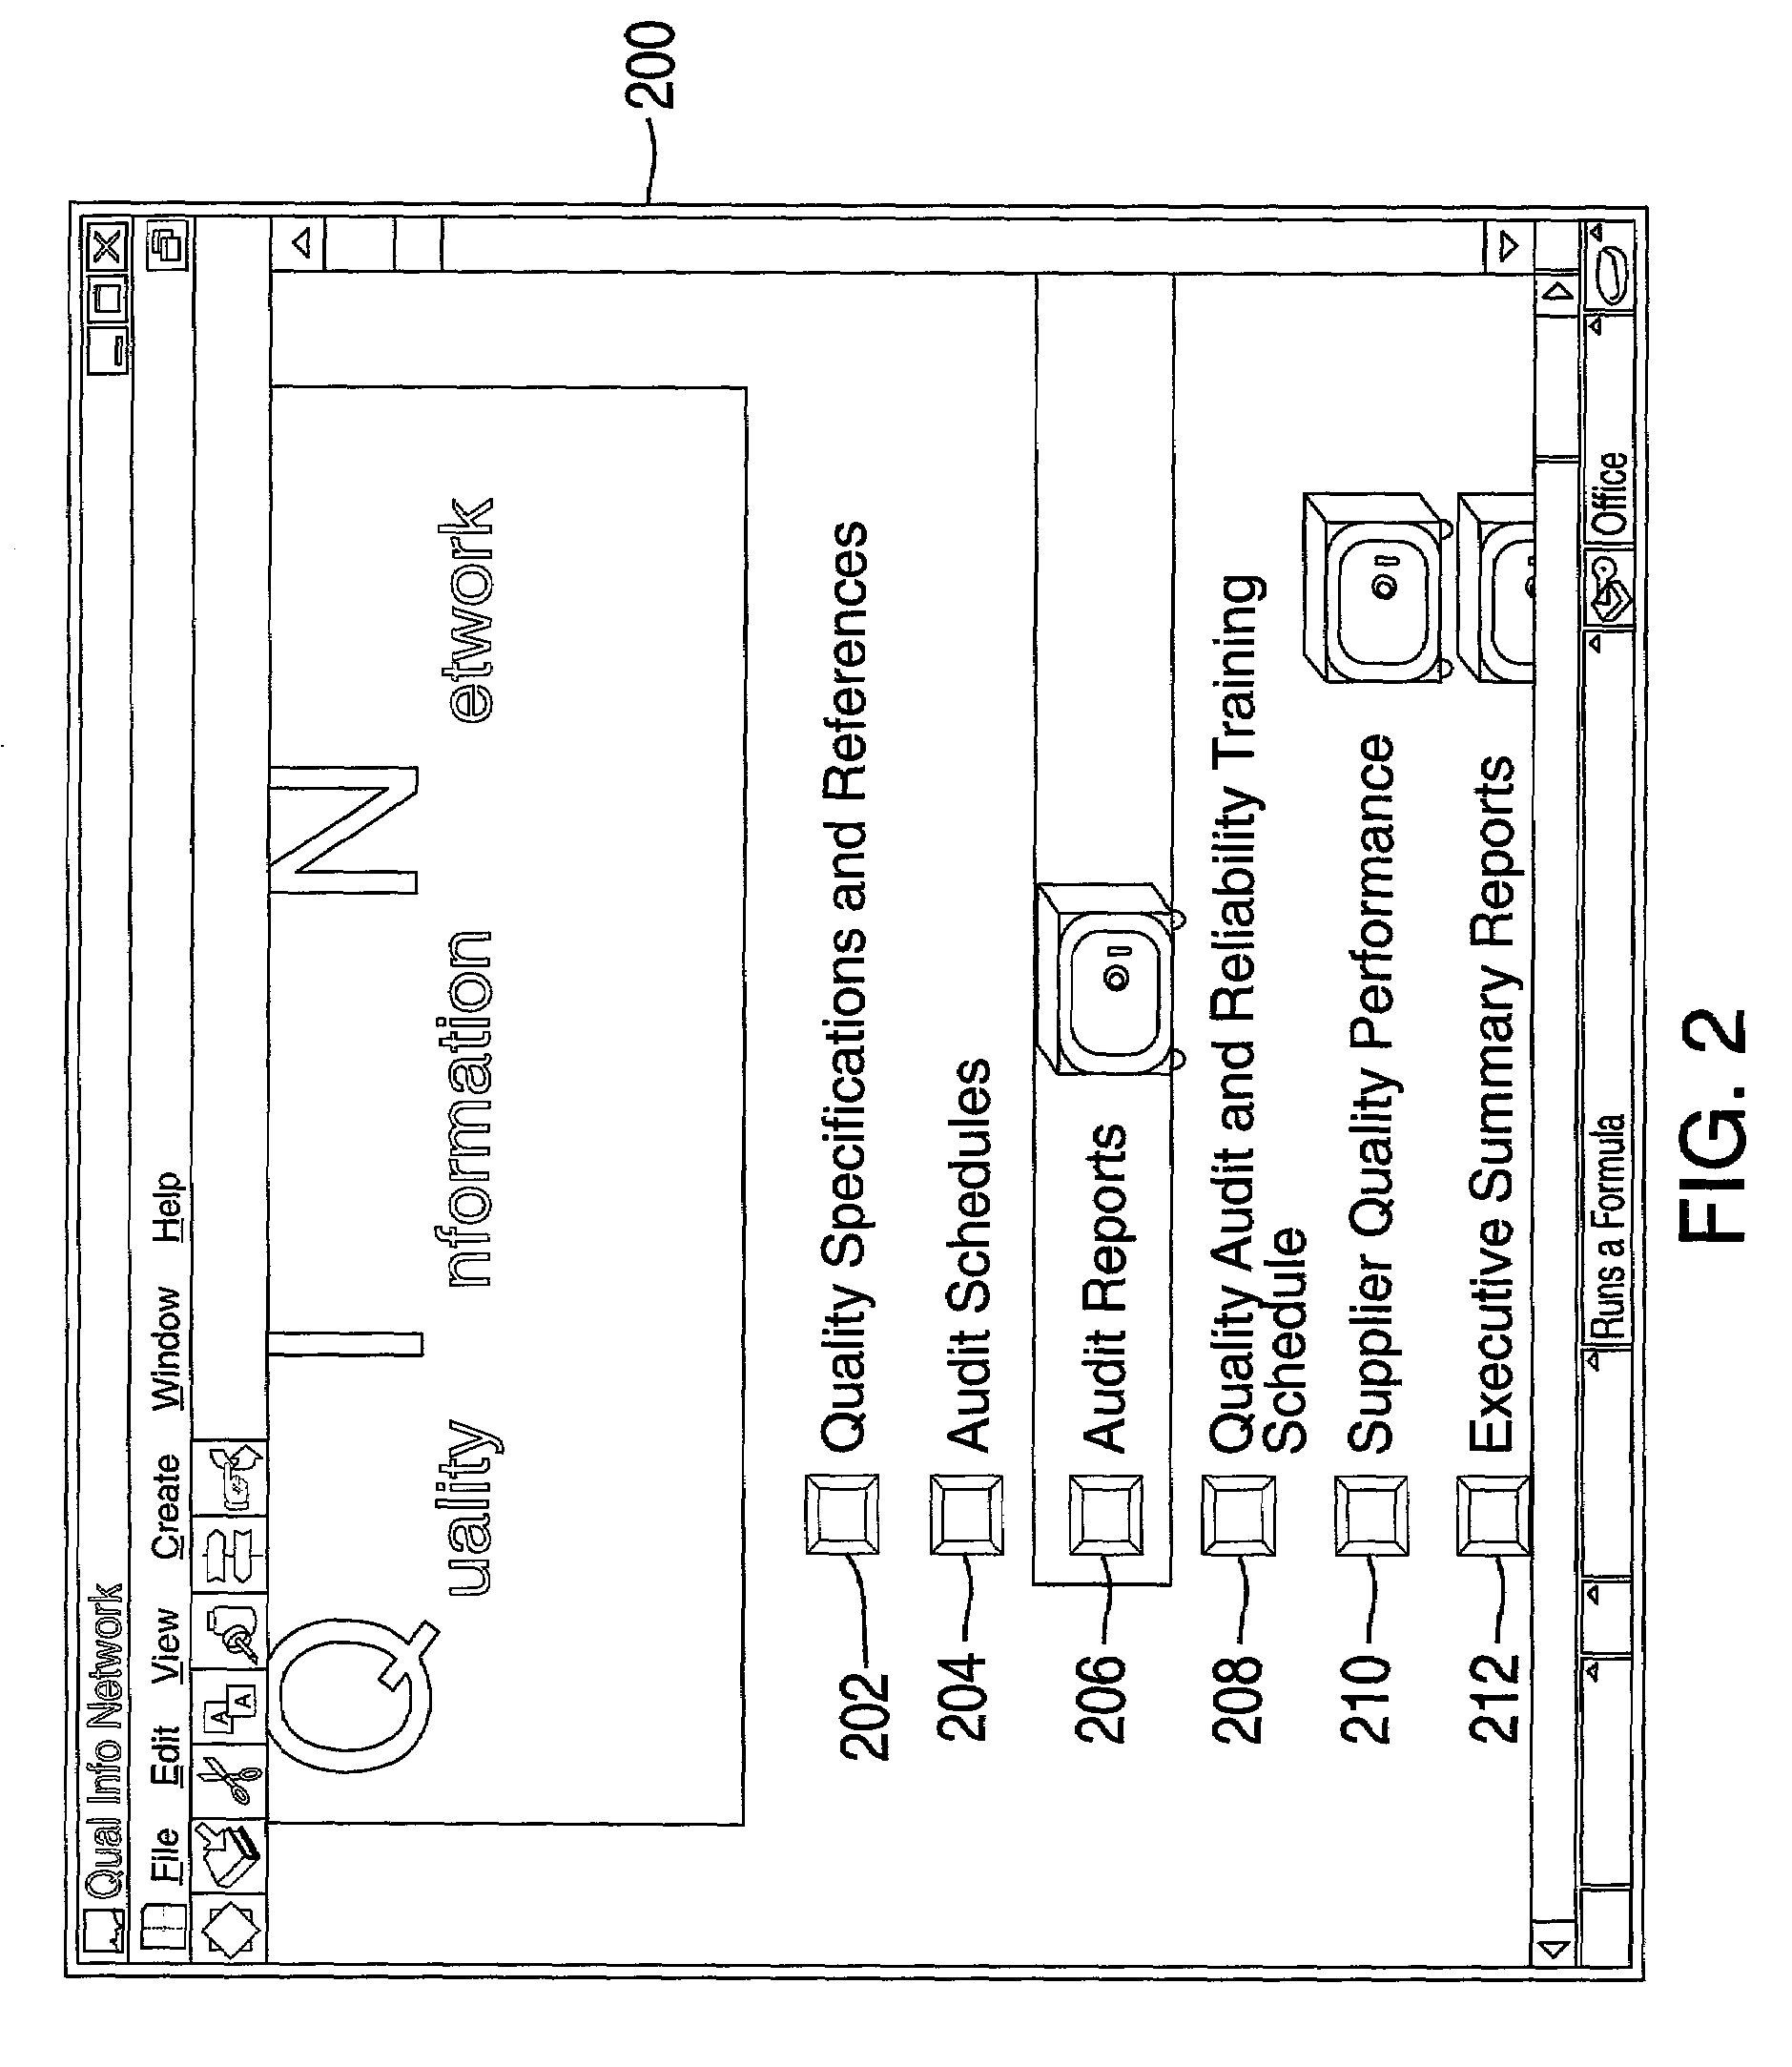 Method and system for gathering and disseminating quality performance and audit activity data in an extended enterprise environment